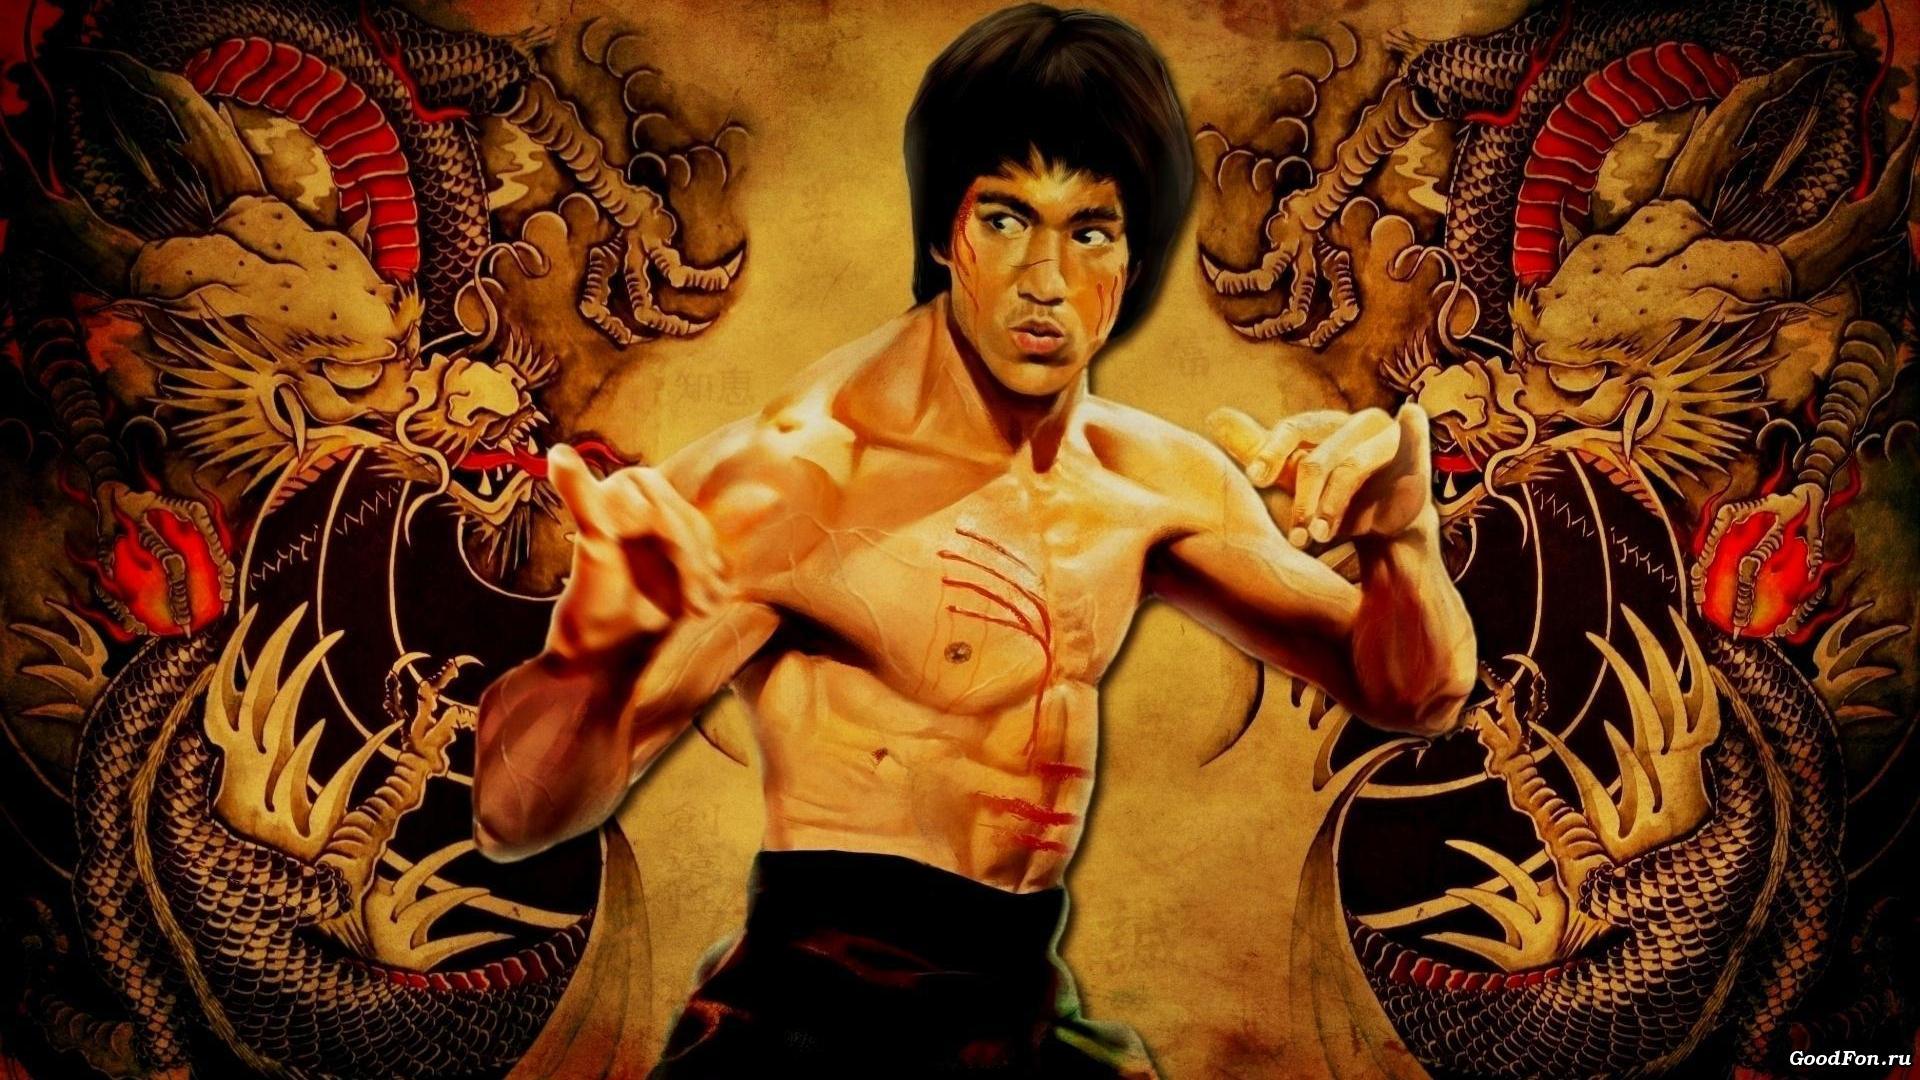 Best image about Bruce Lee Bruce lee quotes 1920x1080